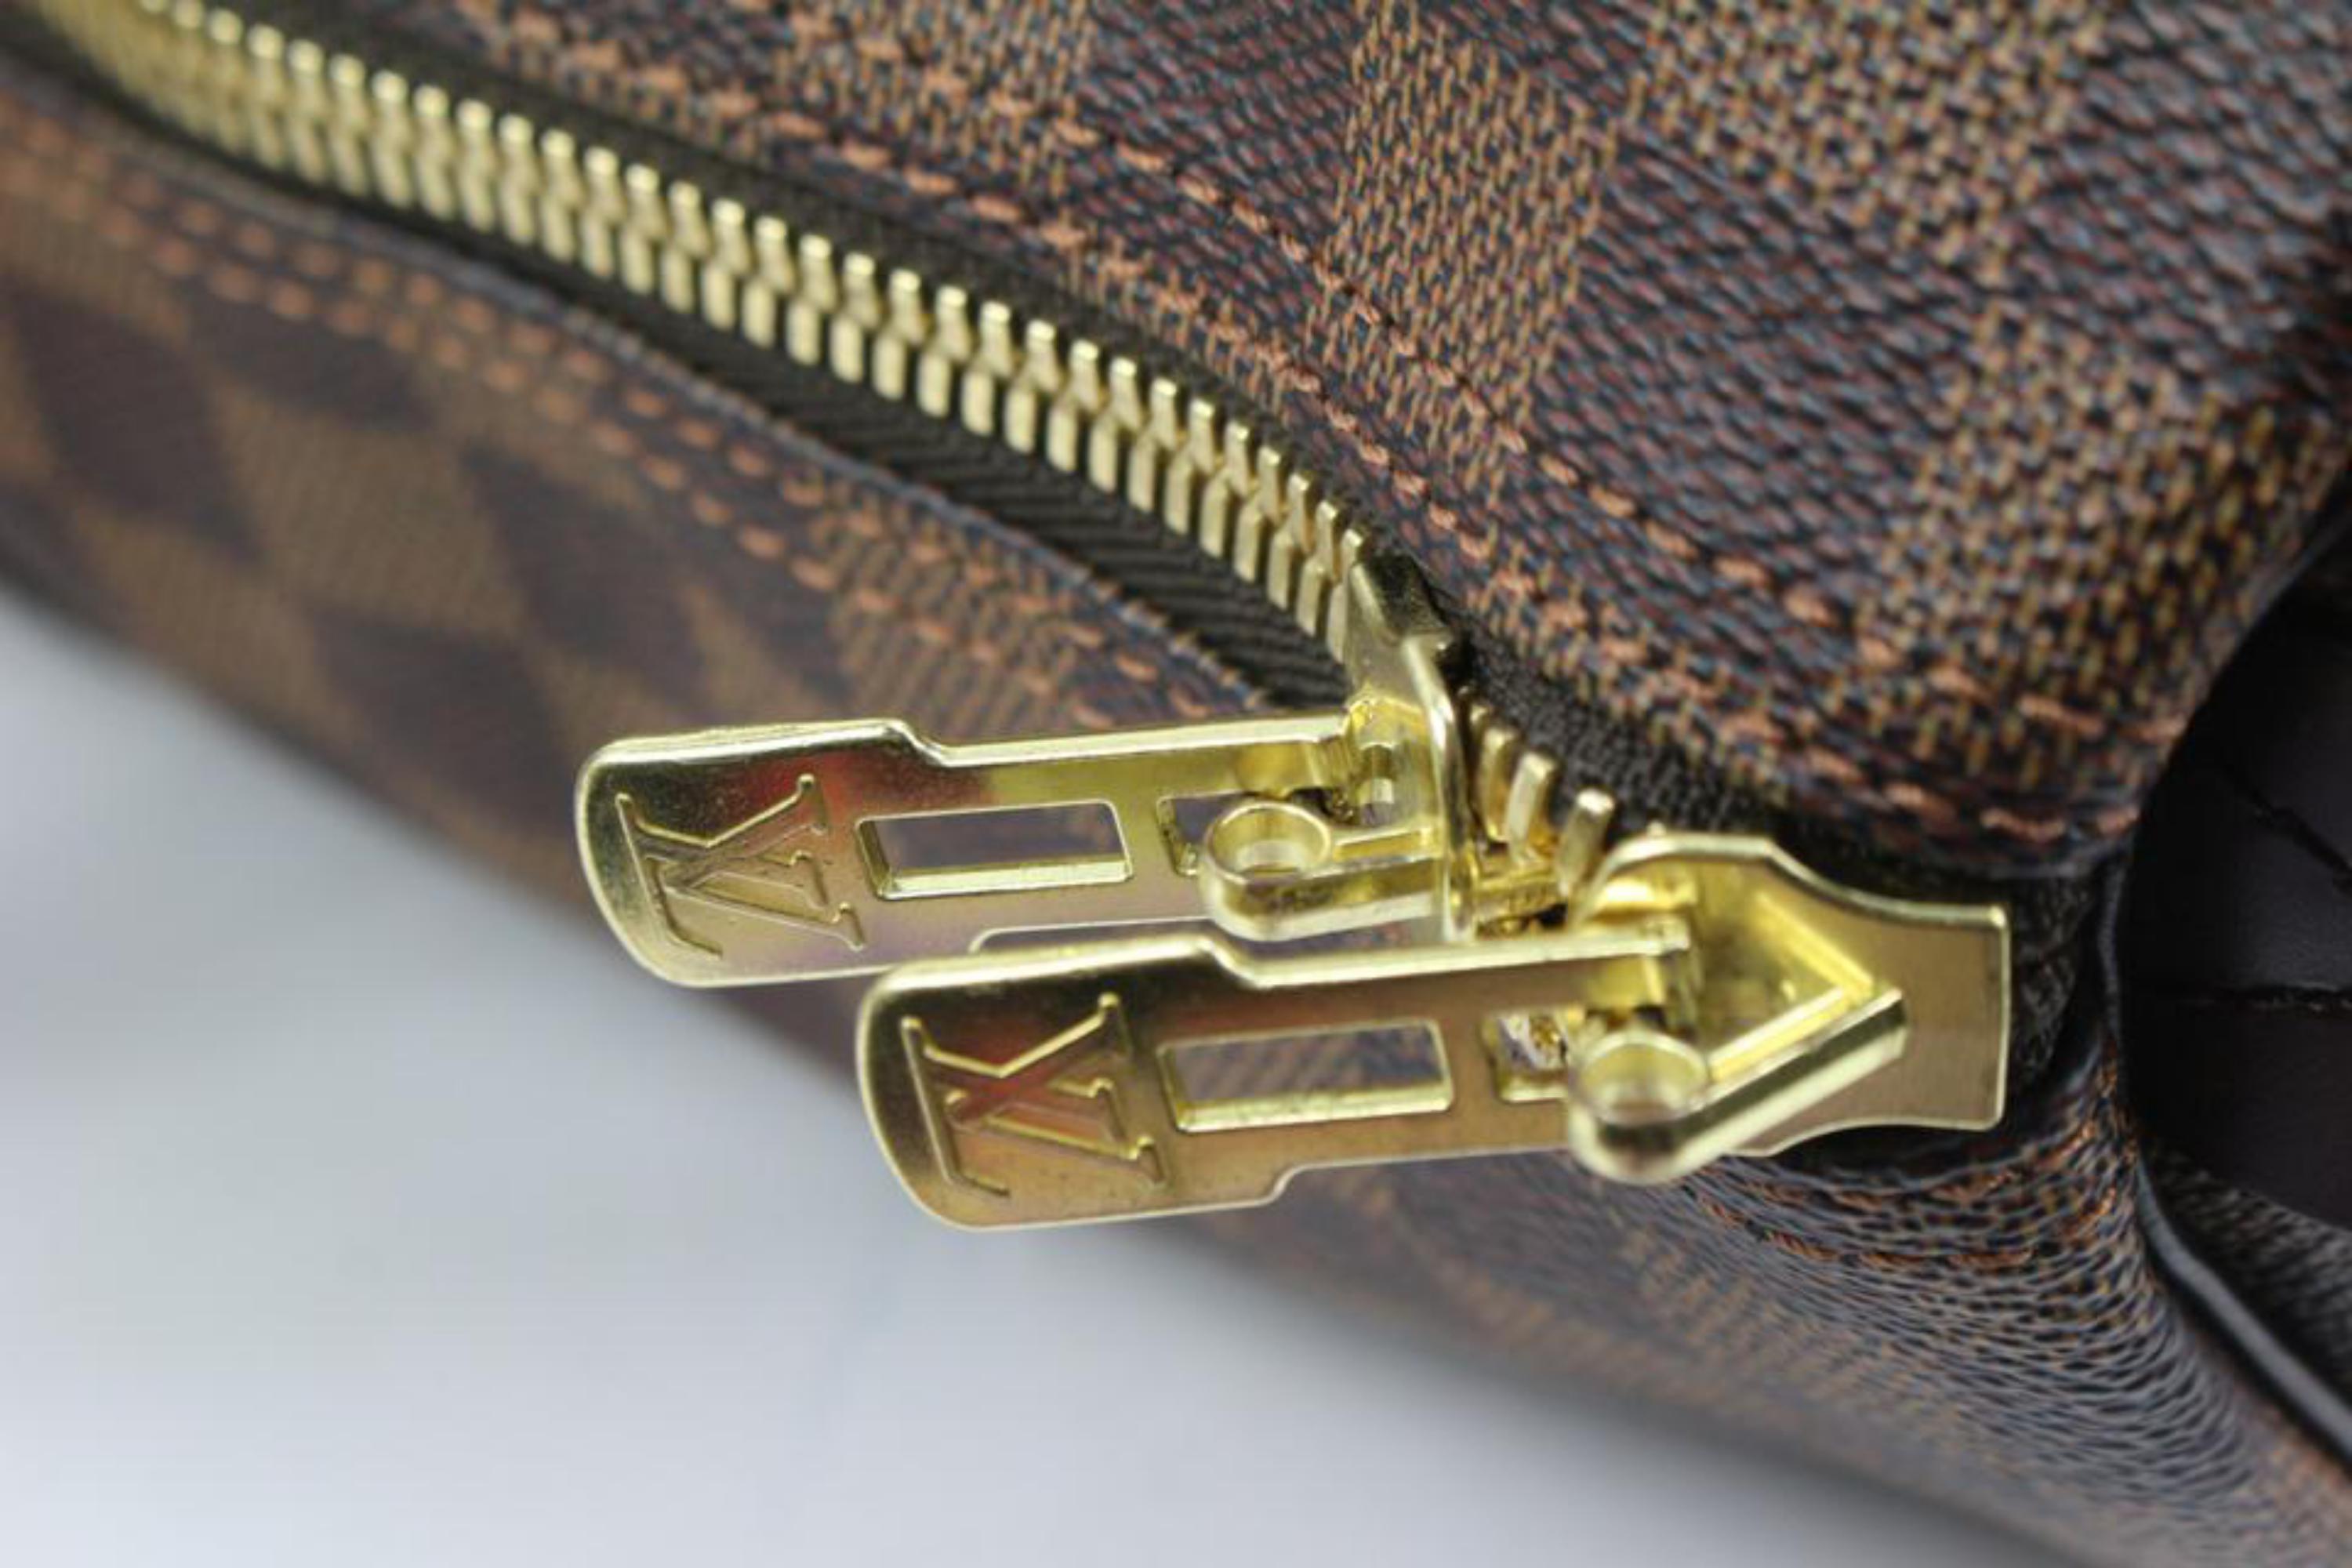 Louis Vuitton Damier Ebene Keepall 50 Boston Duffle Bag 78lz422s In Good Condition For Sale In Dix hills, NY